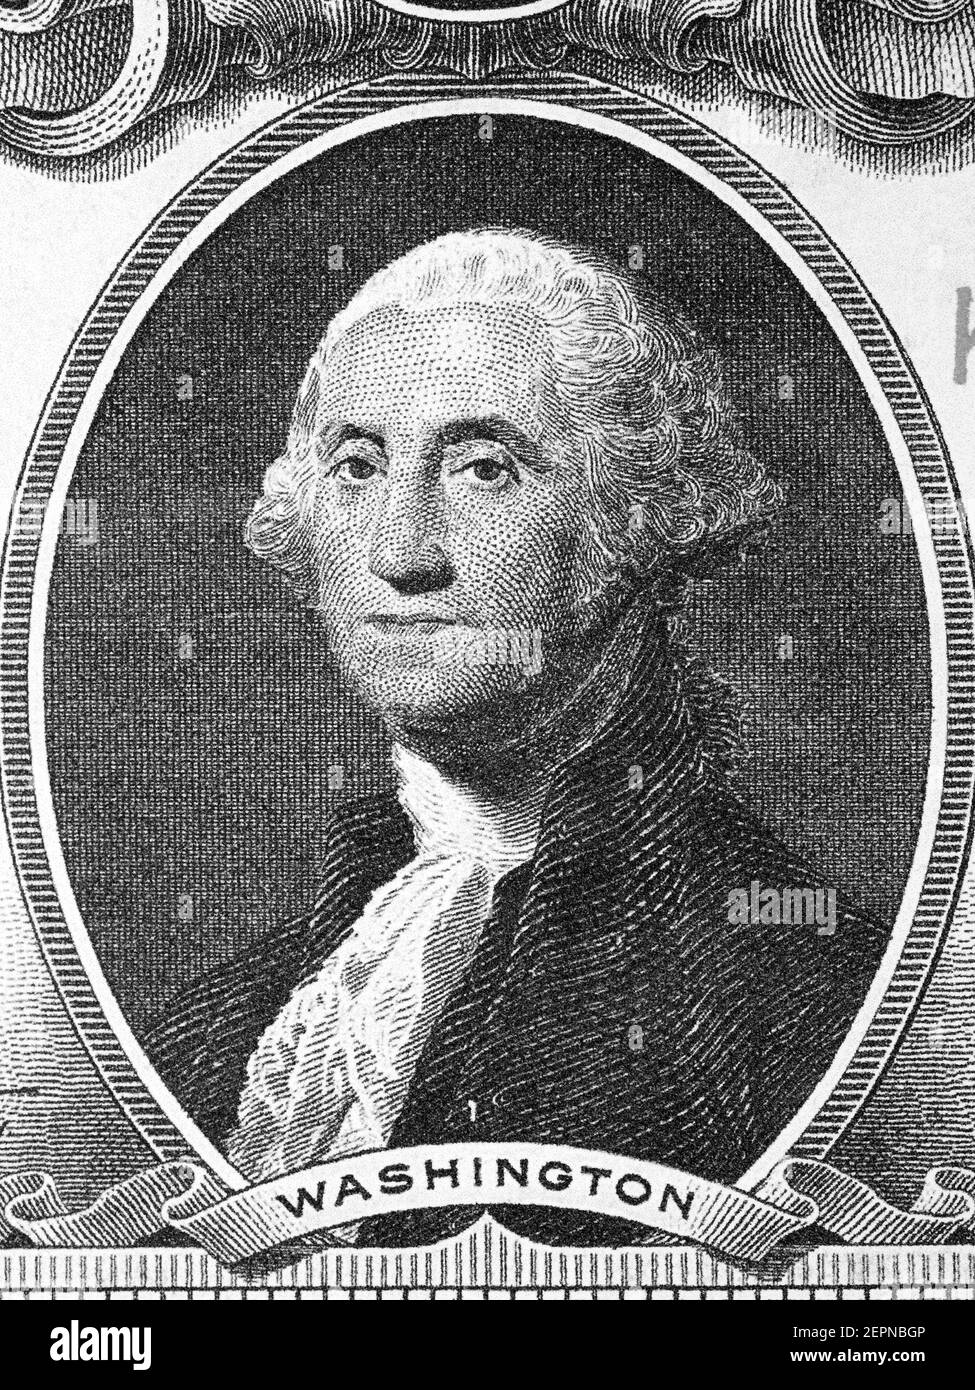 George Washington a portrait from old American money Stock Photo